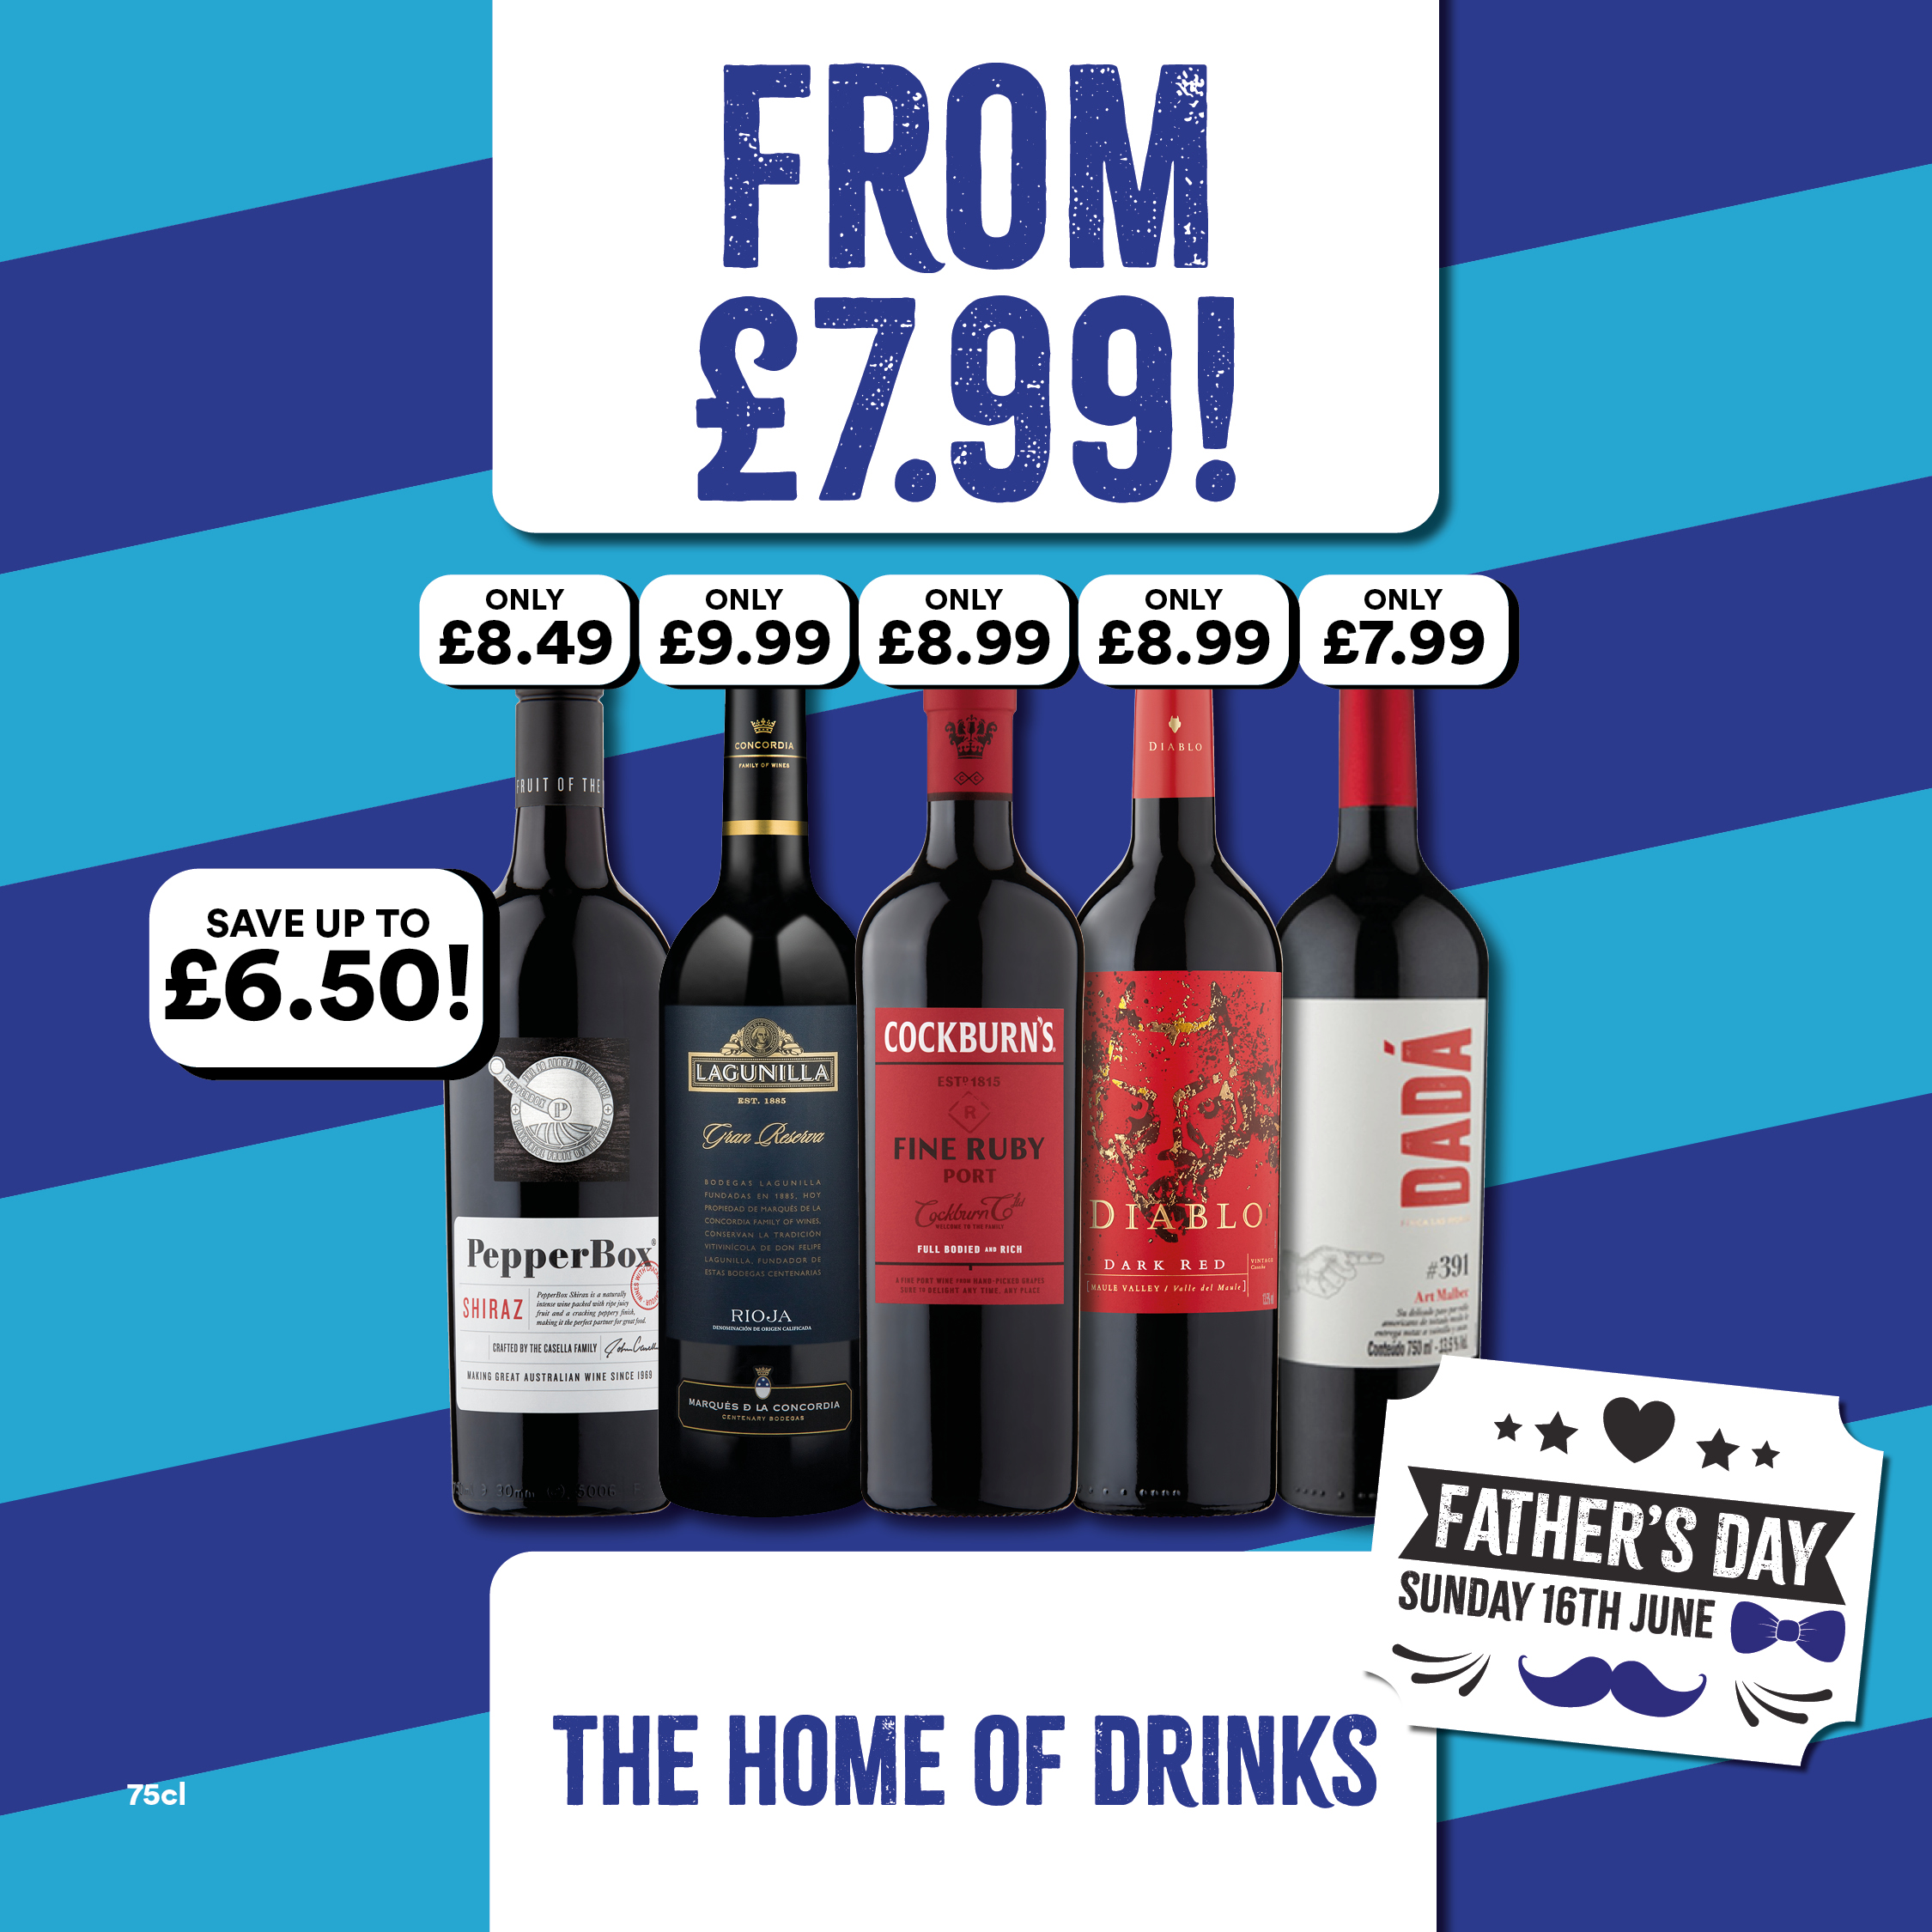 From £7.99 on selected wines Bargain Booze Plus Redditch 01527 514285